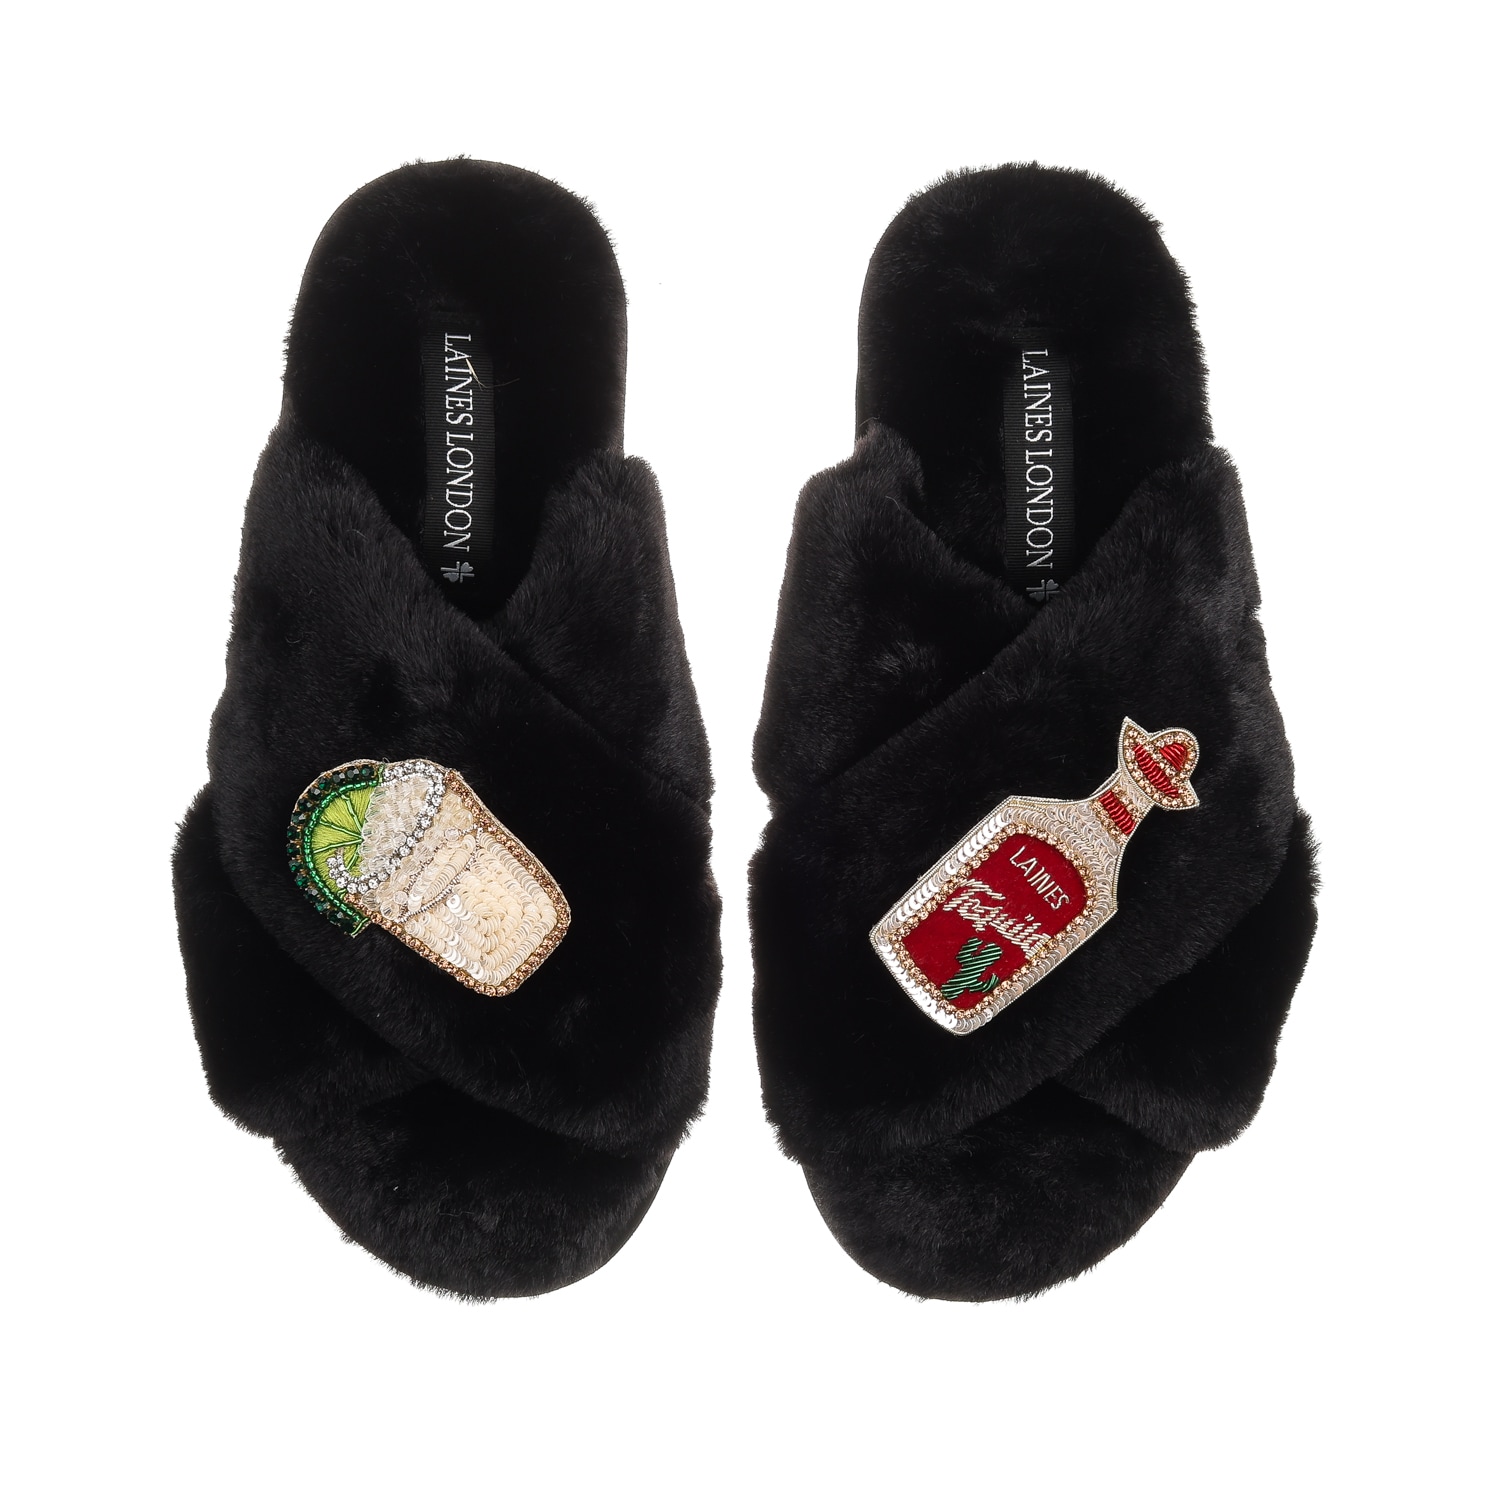 Laines London Women's Classic Laines Slippers With Tequila Slammer Brooches - Black